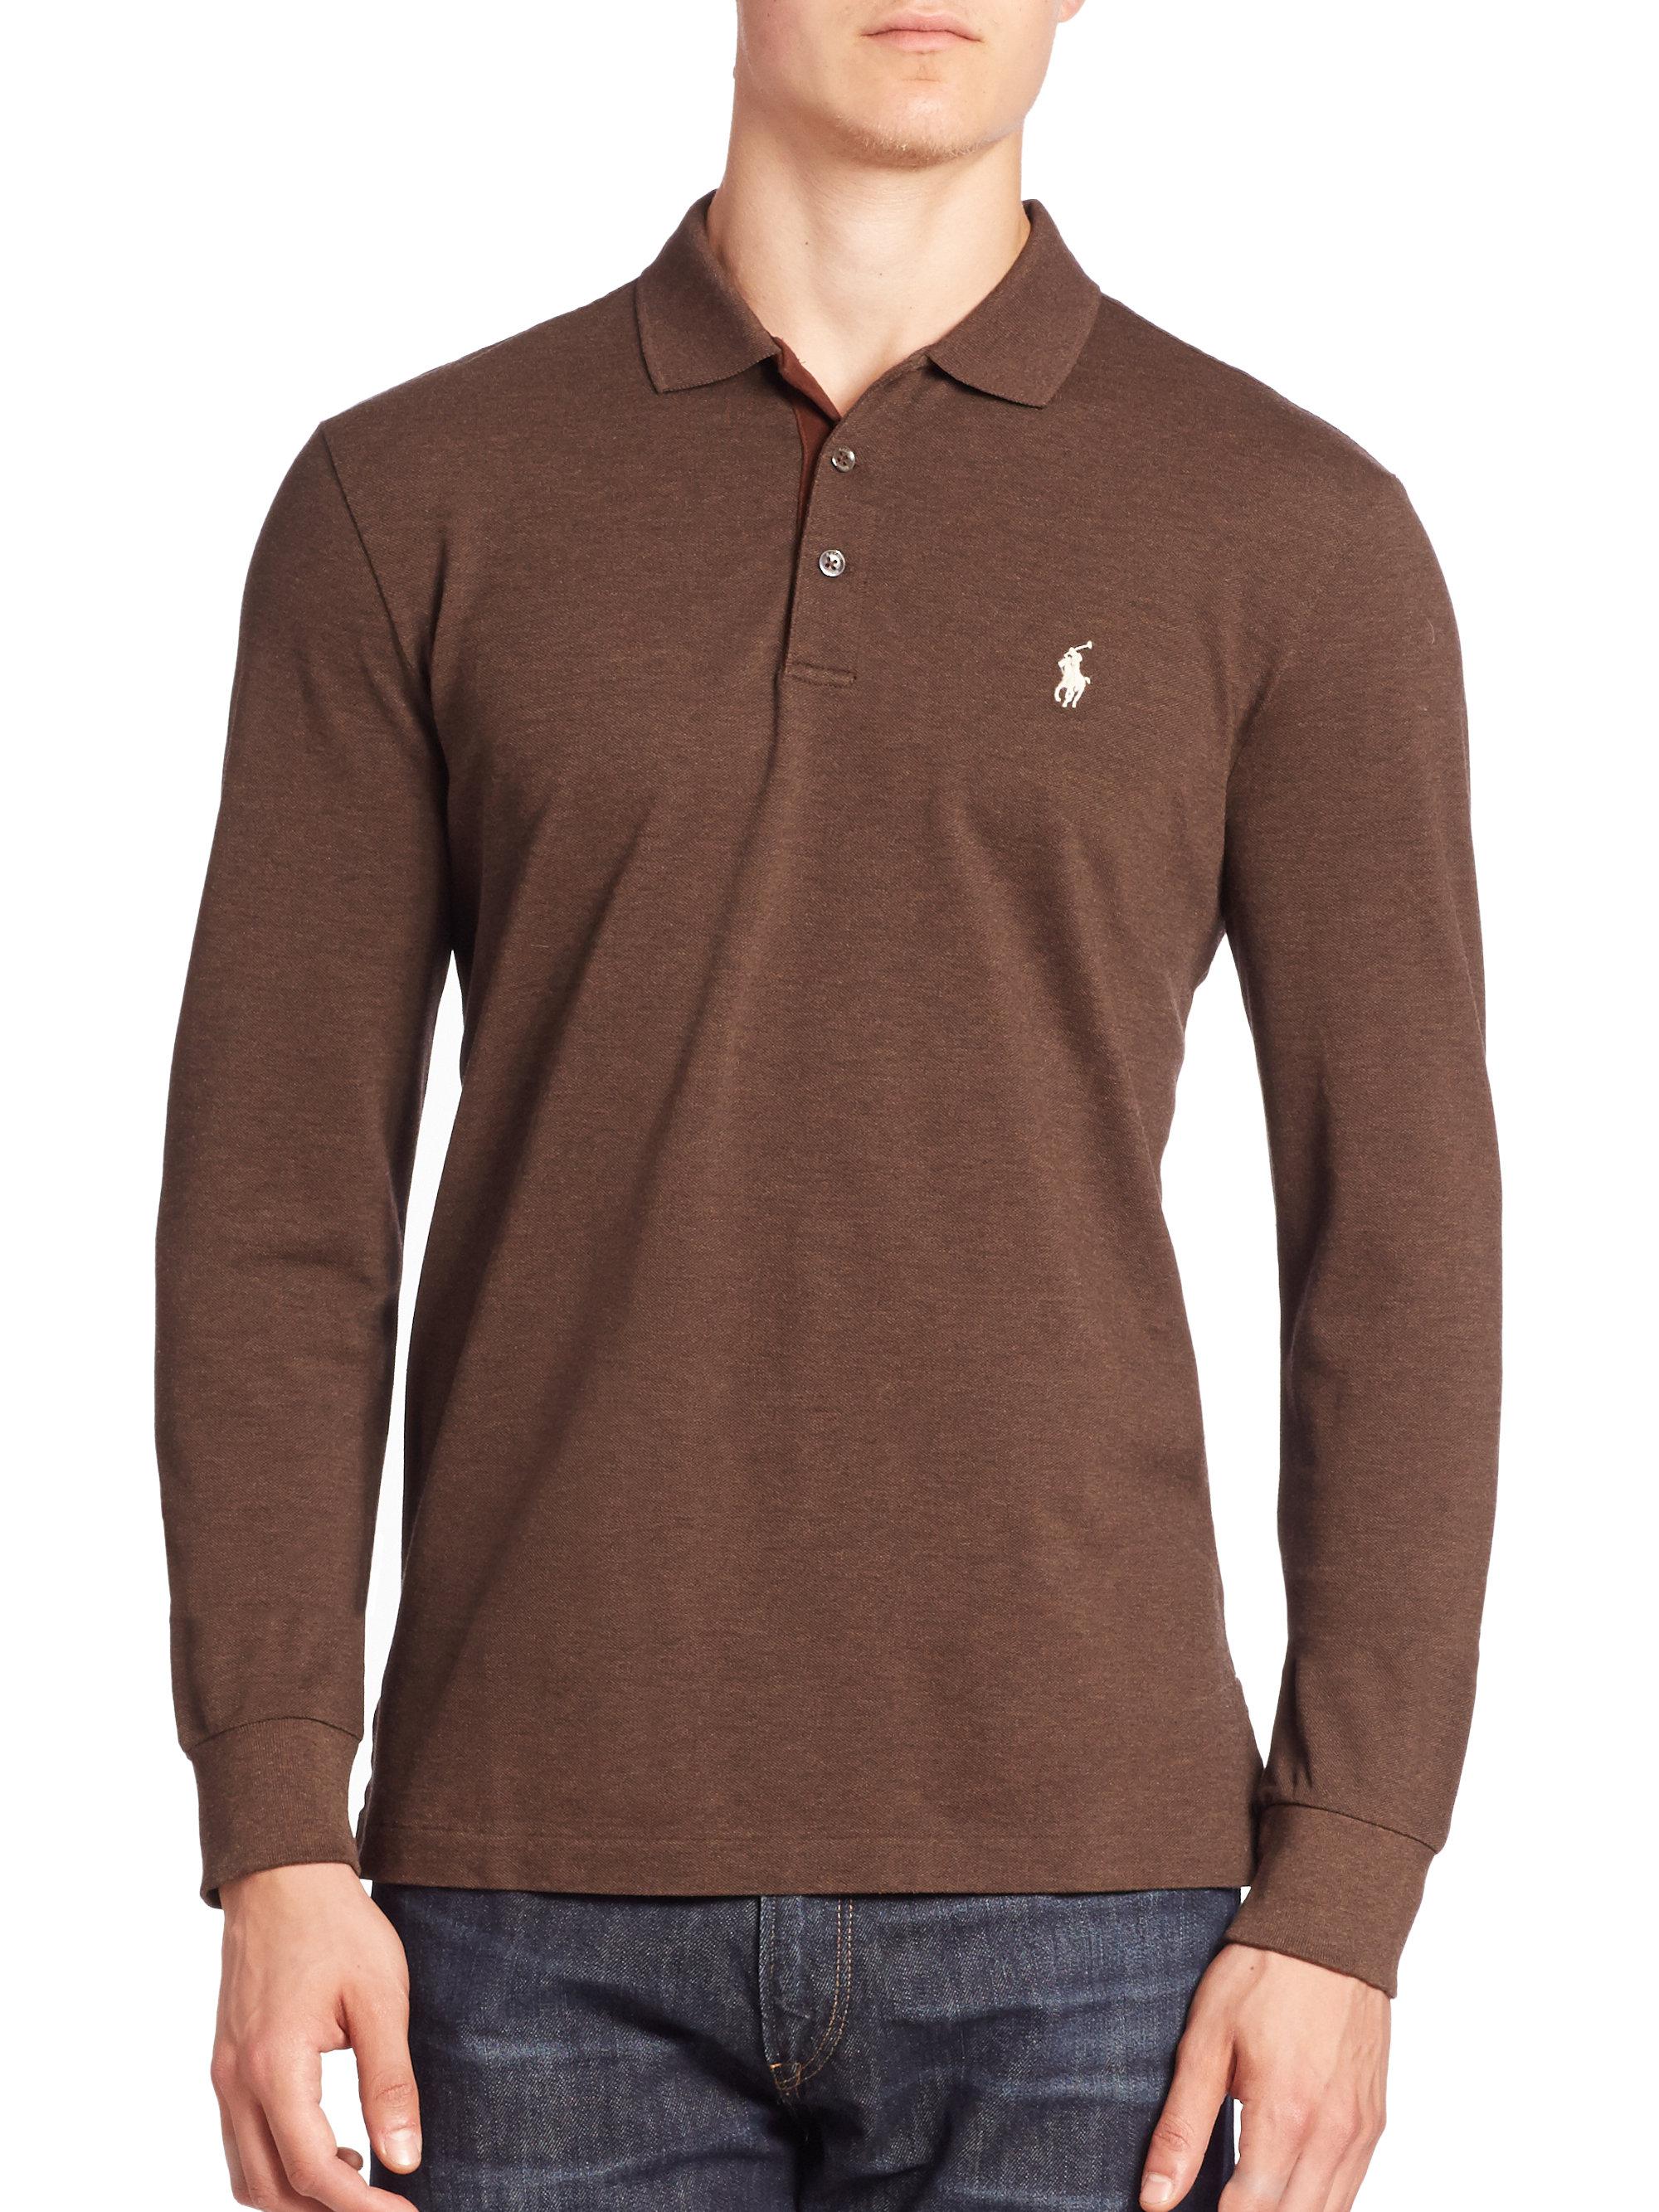 Polo Ralph Lauren Long Sleeve Cotton Polo Shirt in Brown for Men - Lyst